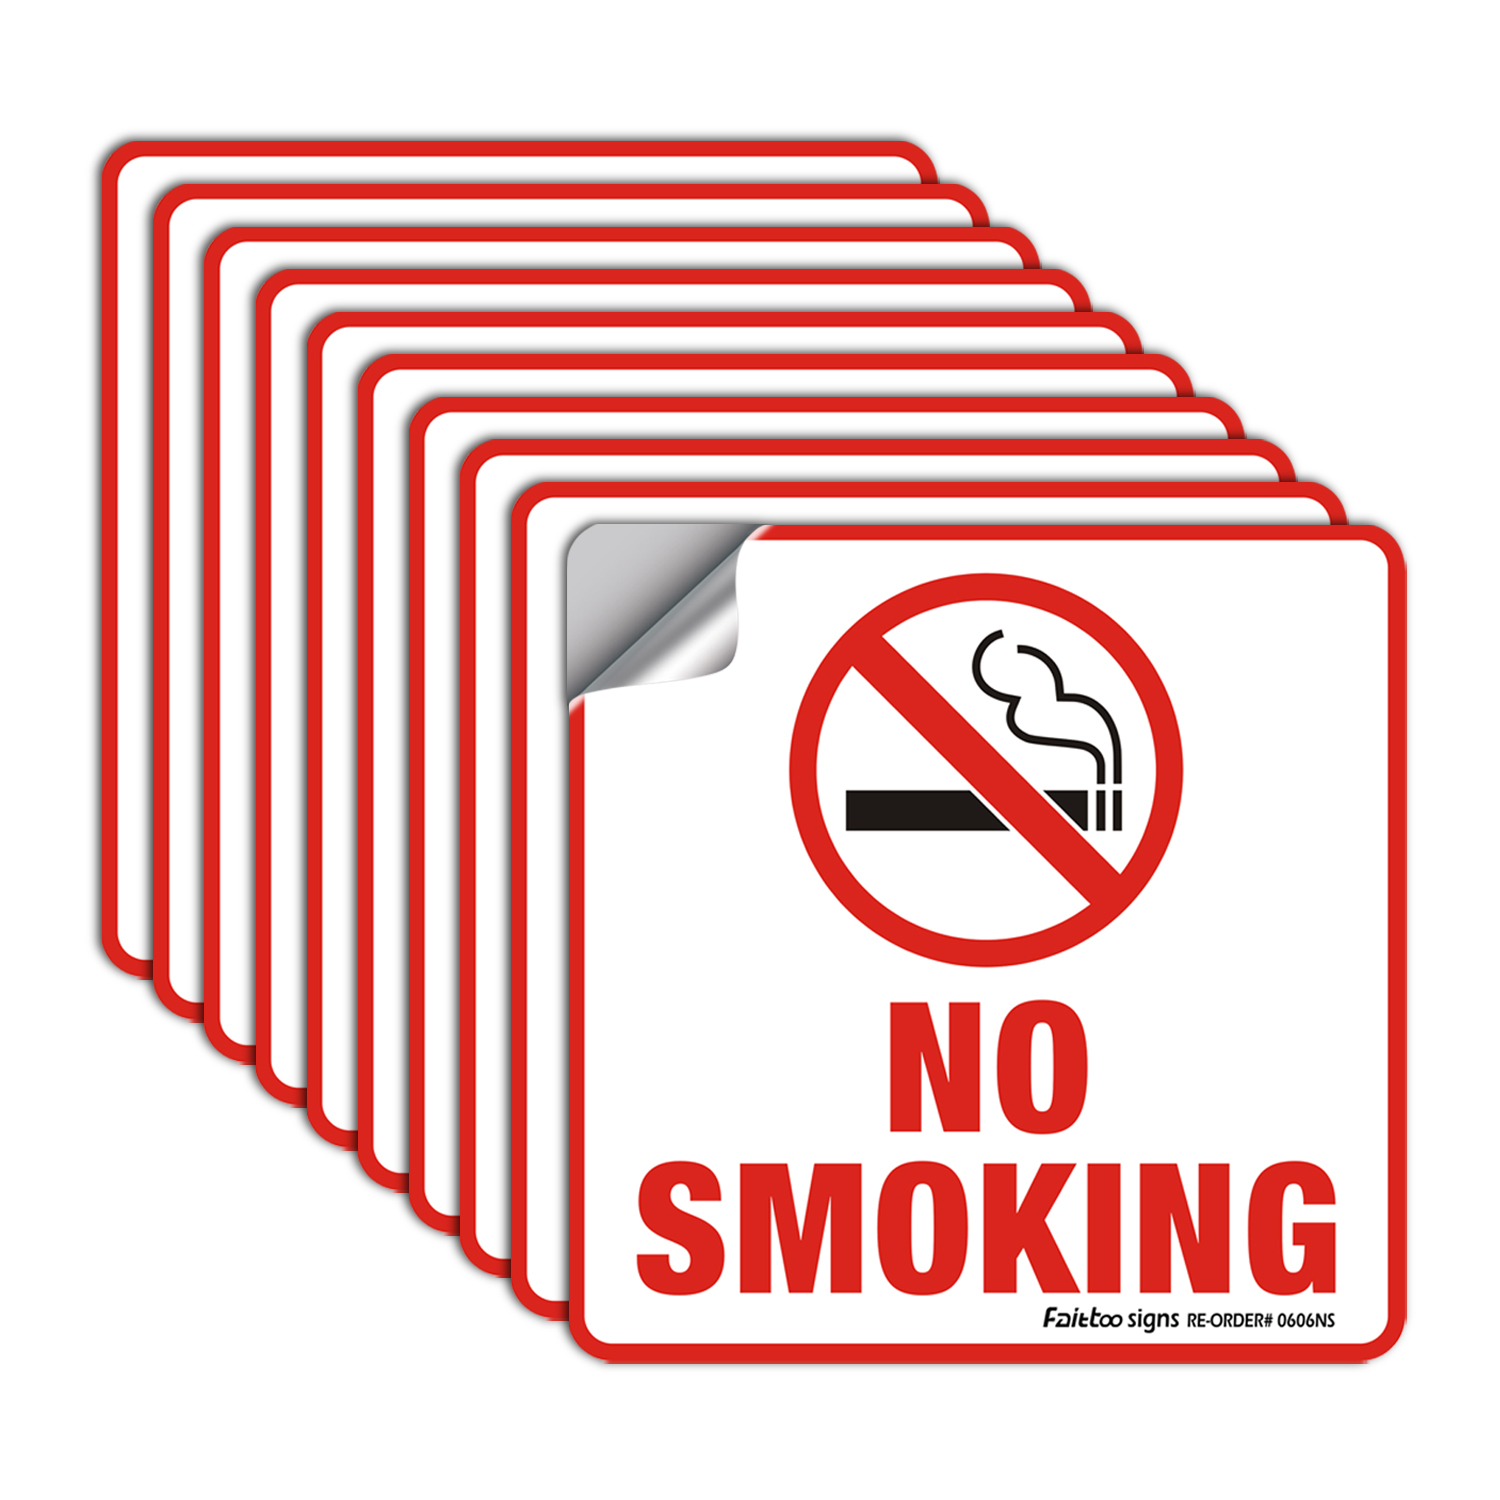 10 Pack No Smoking Stickers, No Smoking Stickers Decals, 6x6 inch Self-Adhesive Vinyl Decal Stickers, UV Printed, Durable Ink, Waterproof, Easy to Mount, Indoor/Outdoor Use